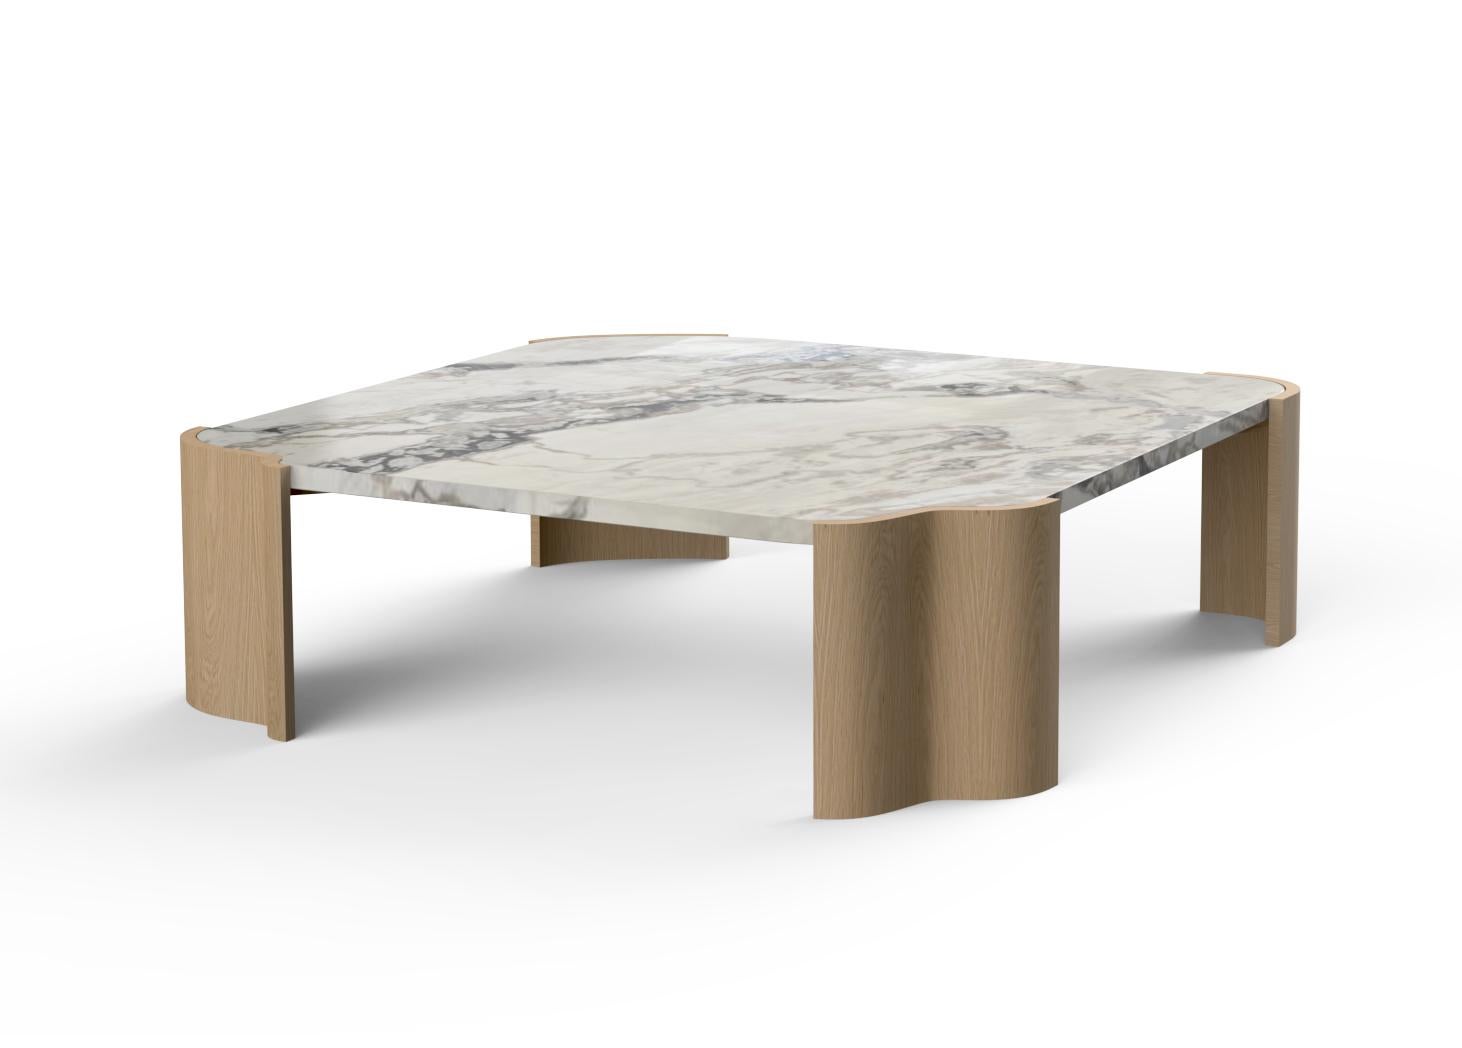 Salemas coffee table, Contemporary Collection, handcrafted in Portugal - Europe by Greenapple.

Salemas coffee table was designed to enhance the serene interior spaces of your home with its neutral colors and aesthetic. The lush stone texture of the